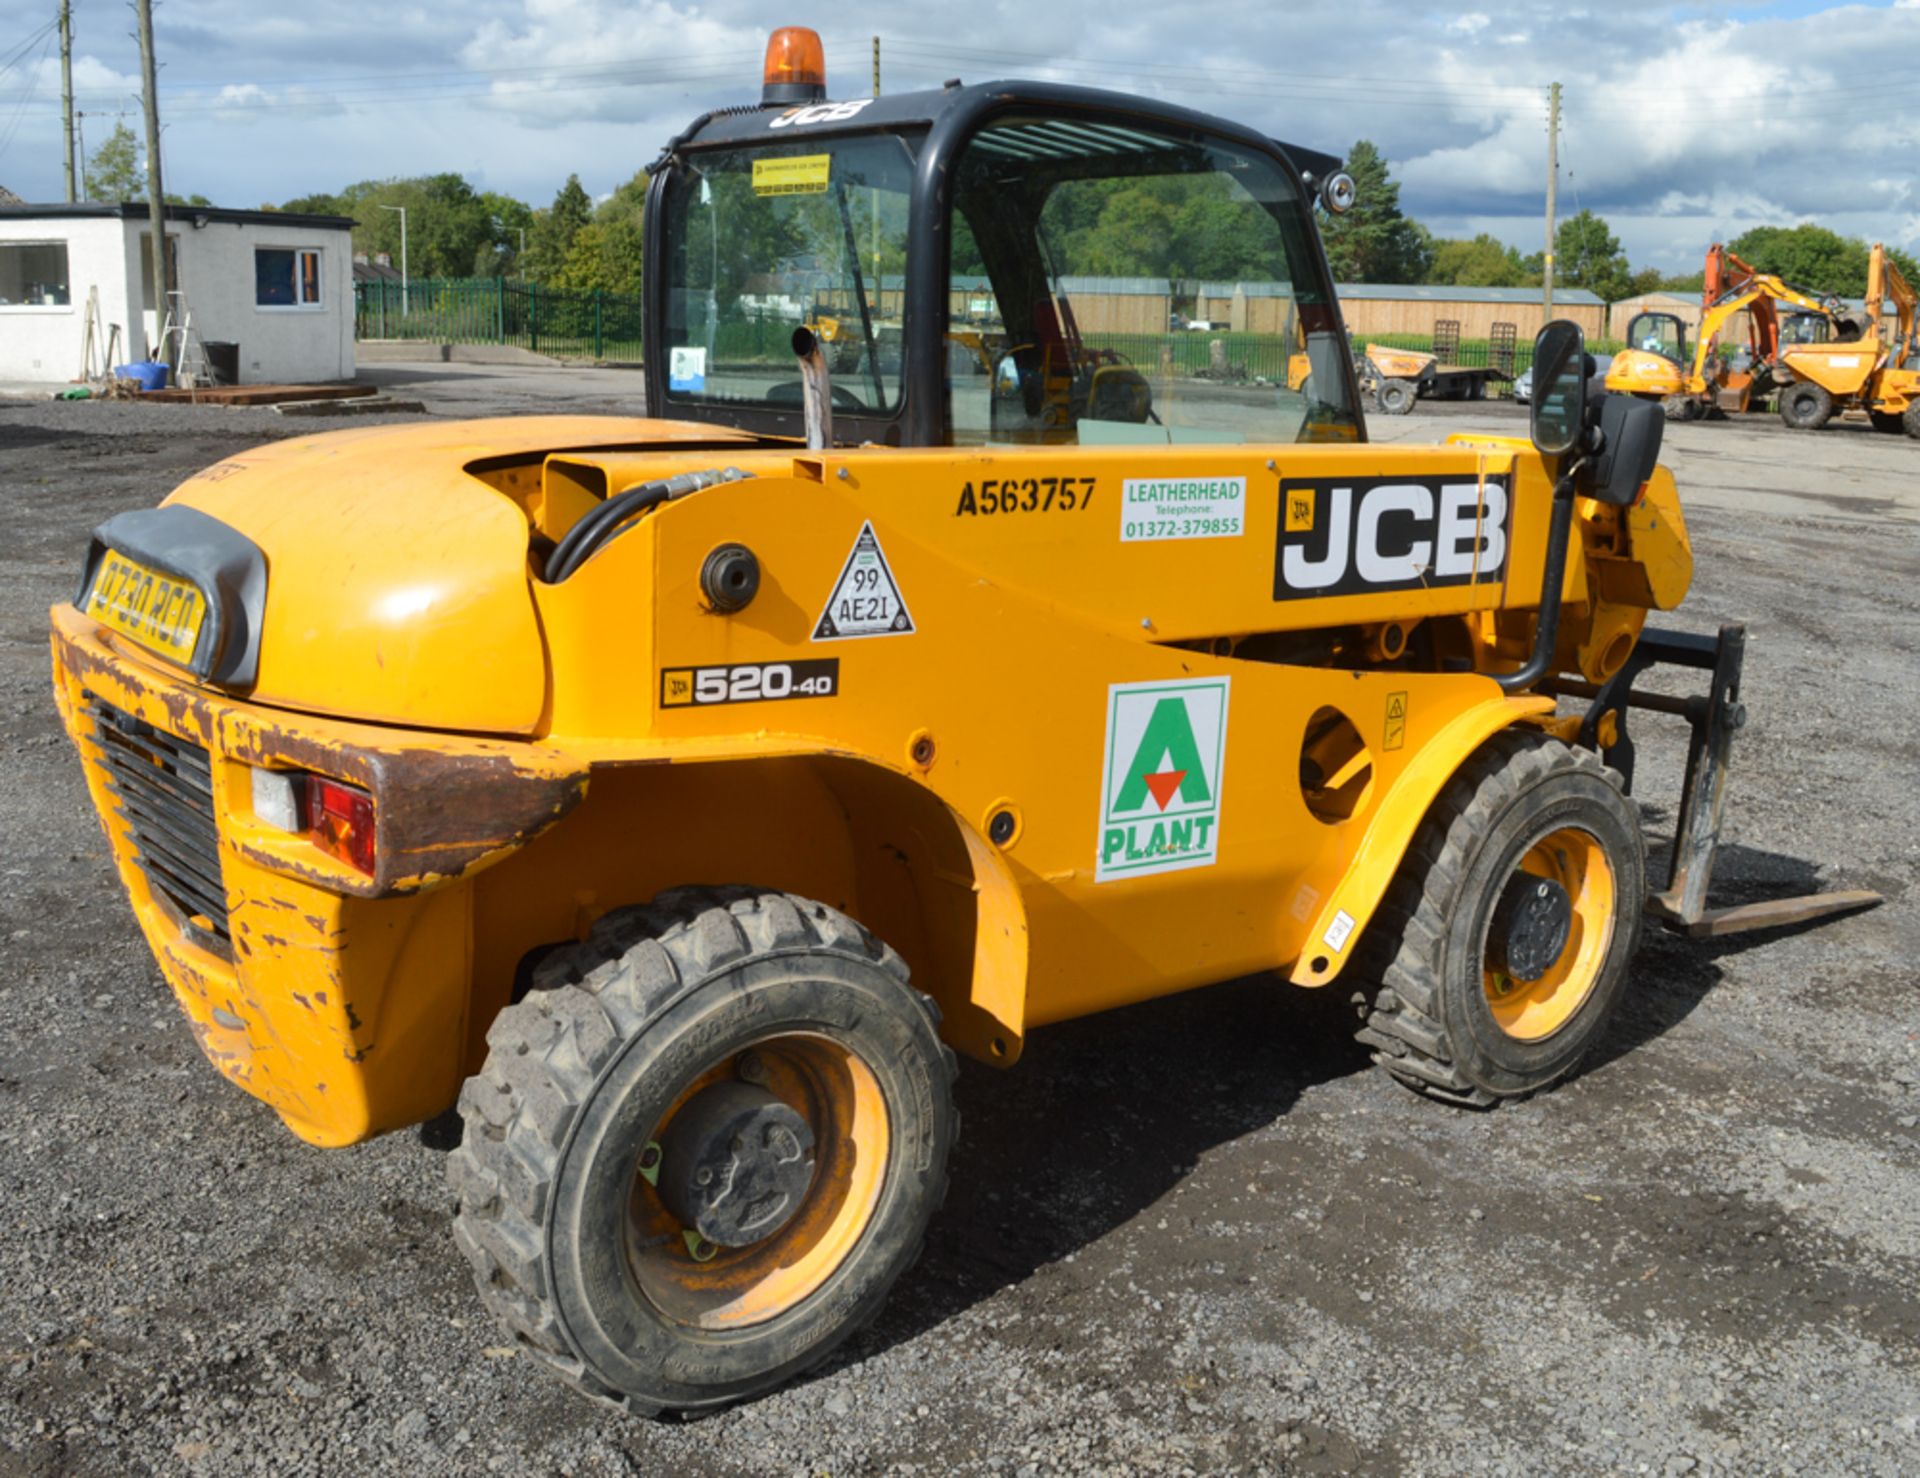 JCB 520-40 4 metre telescopic handler  Year: 2011 S/N: 01781361 Recorded hours: 1847 A563757 - Image 3 of 13